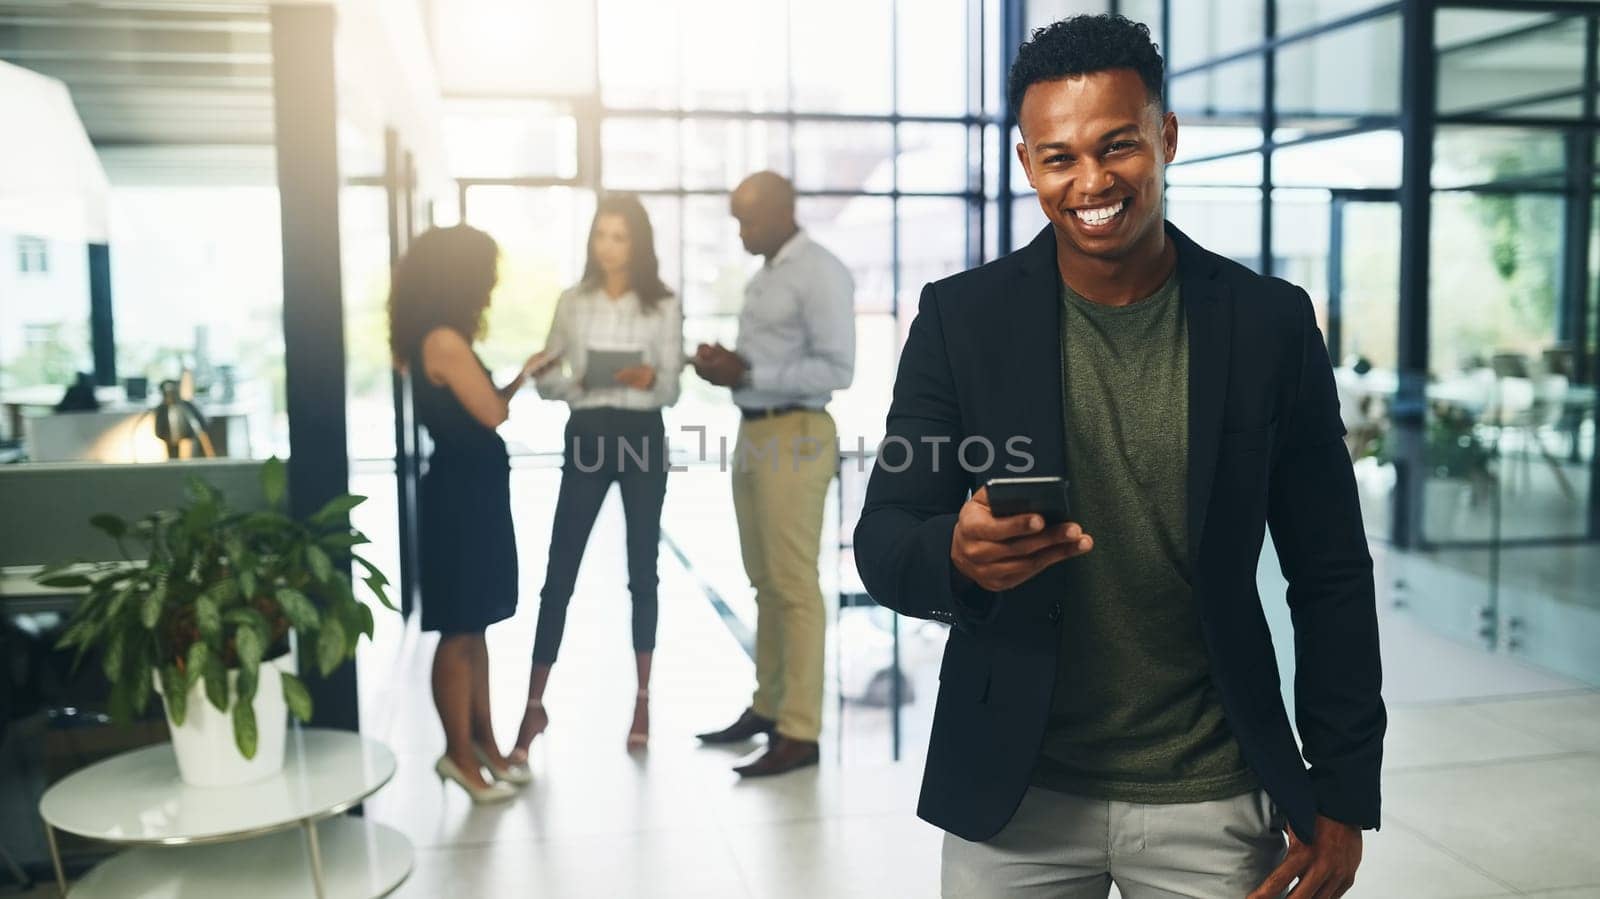 Technology helps me find all I need to operate business smoothly. Portrait of a young businessman using a cellphone in an office with his colleagues in the background